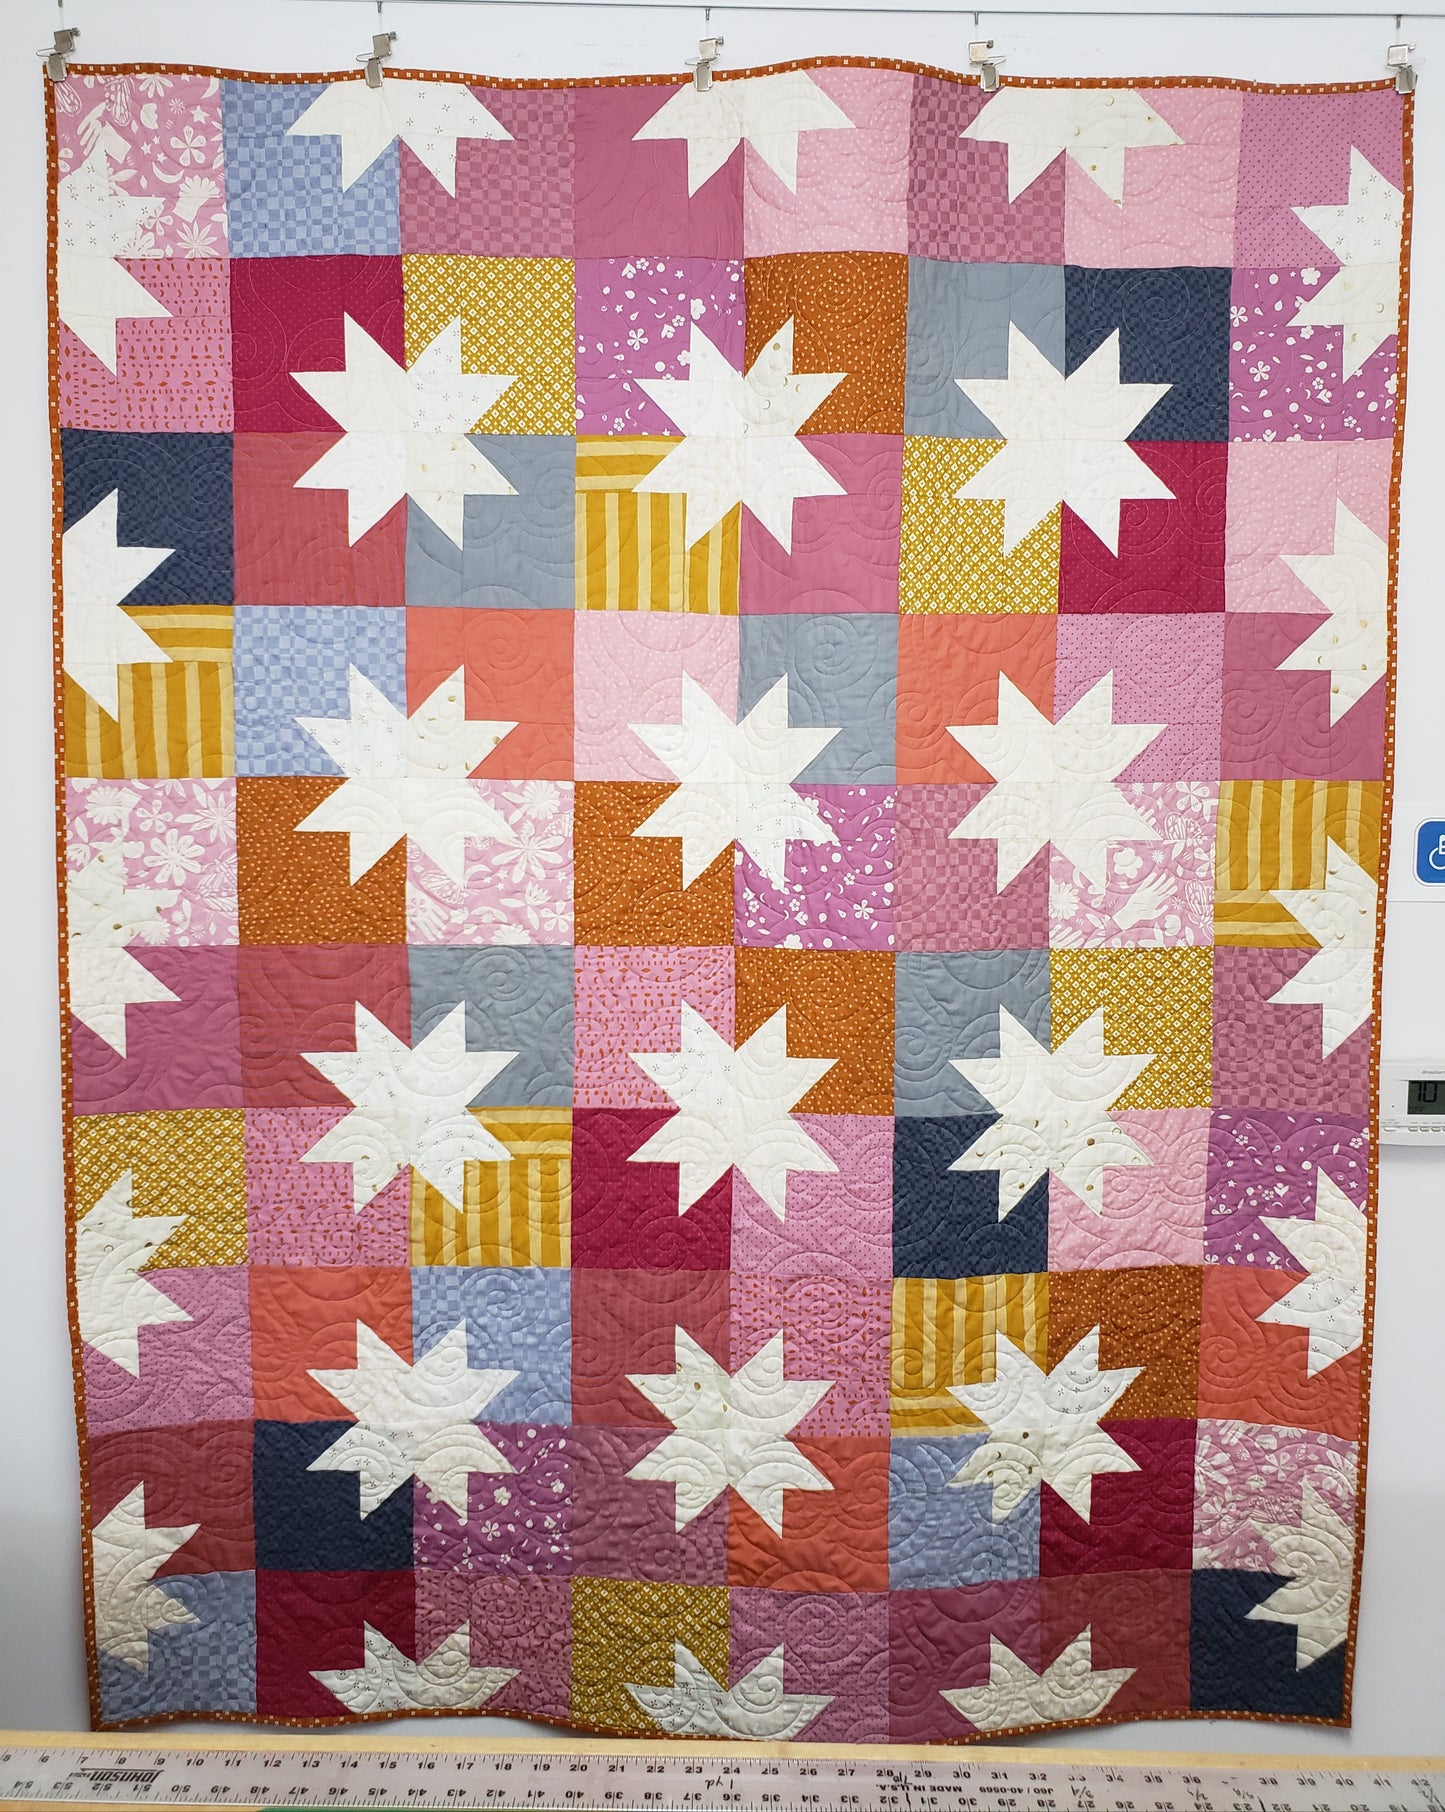 image of a quilt with stars